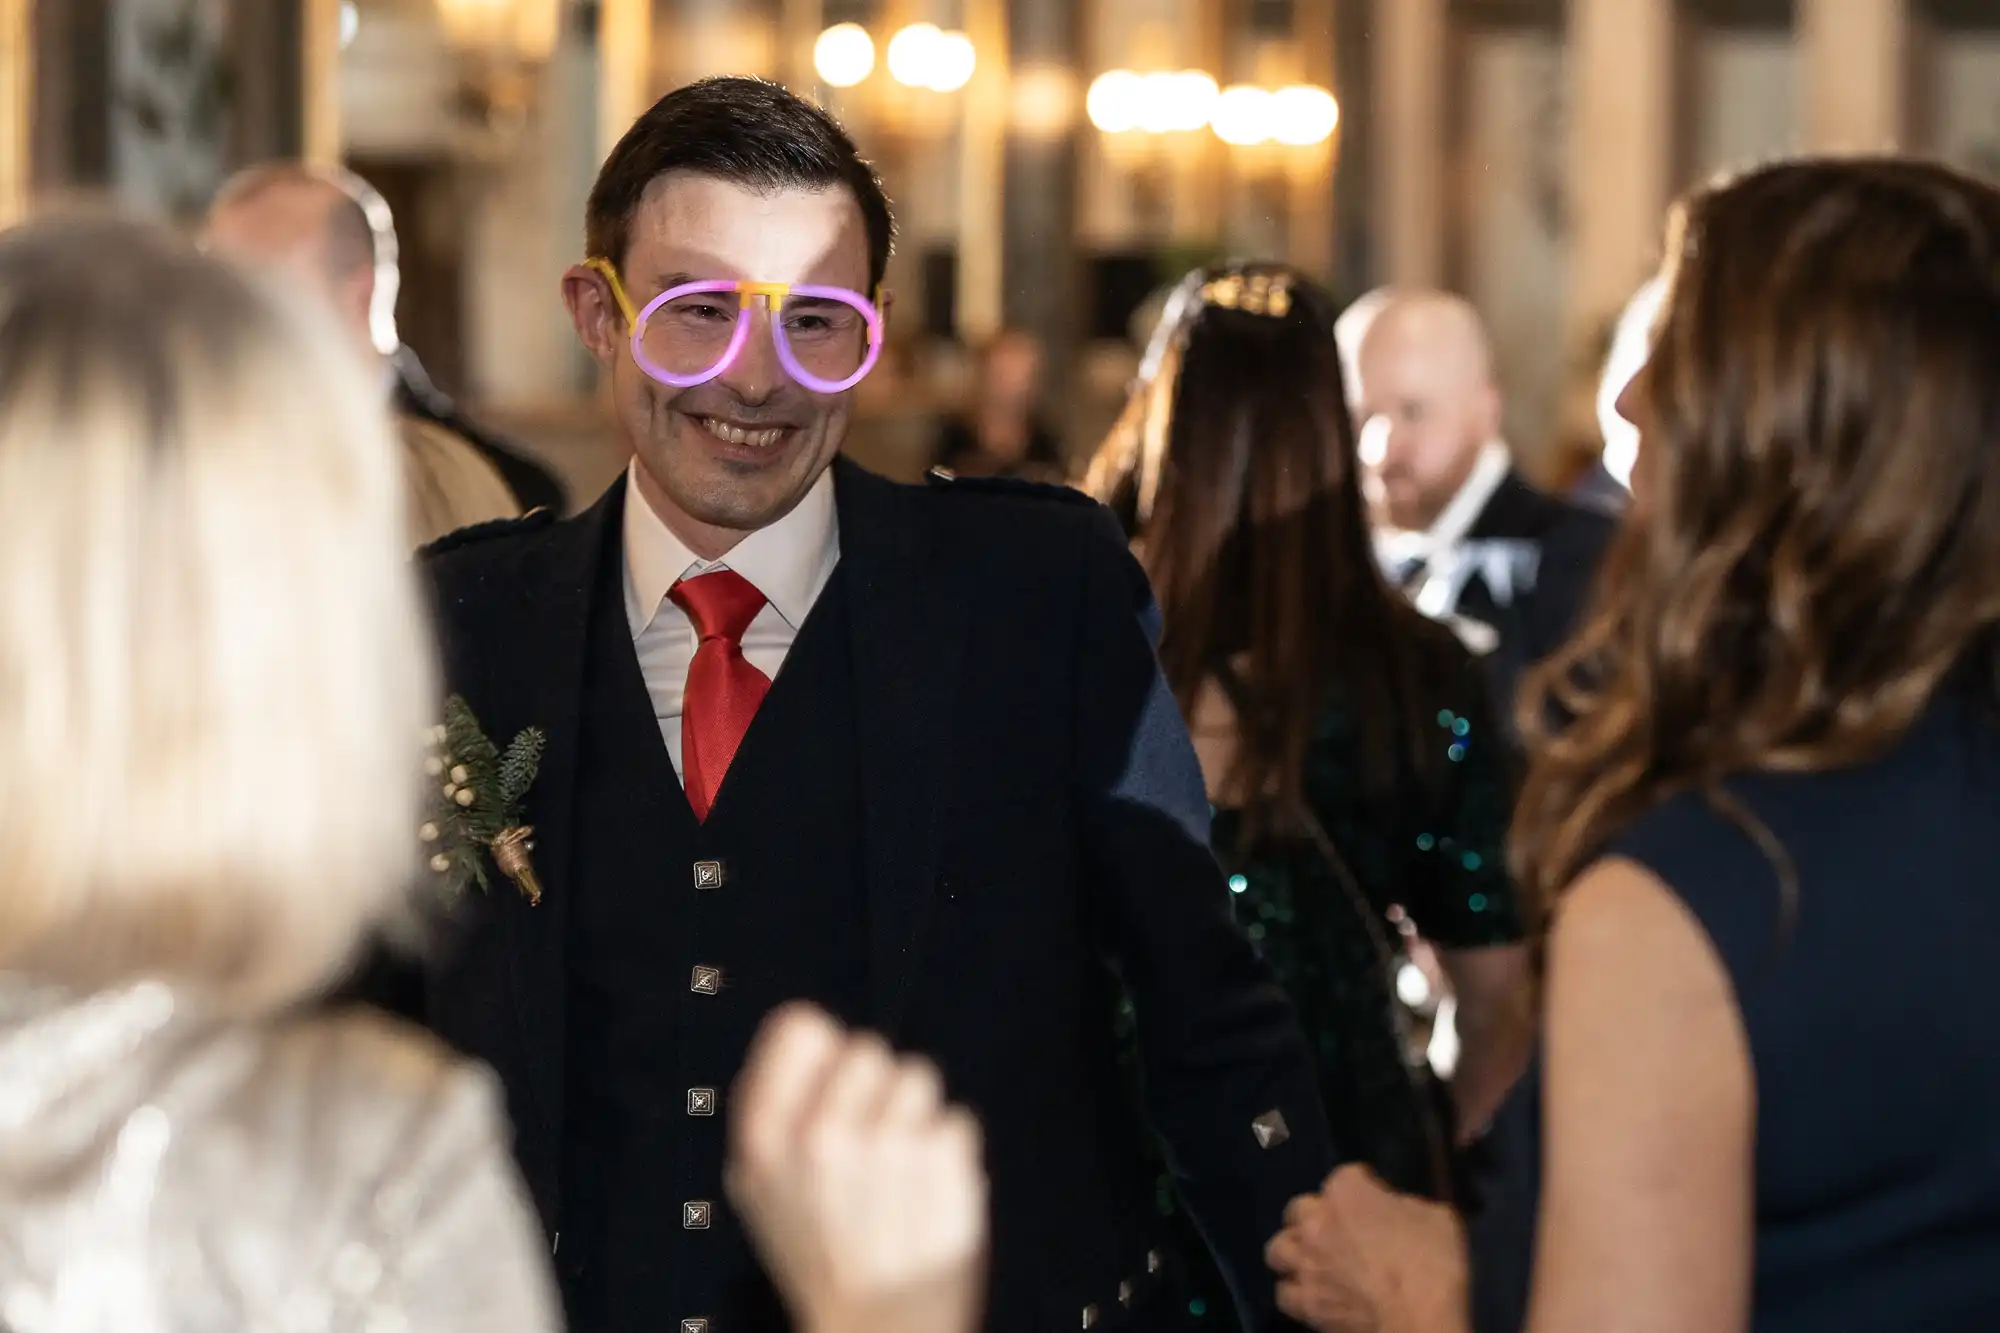 A man with neon pink glasses is smiling and interacting with guests at a formal event.